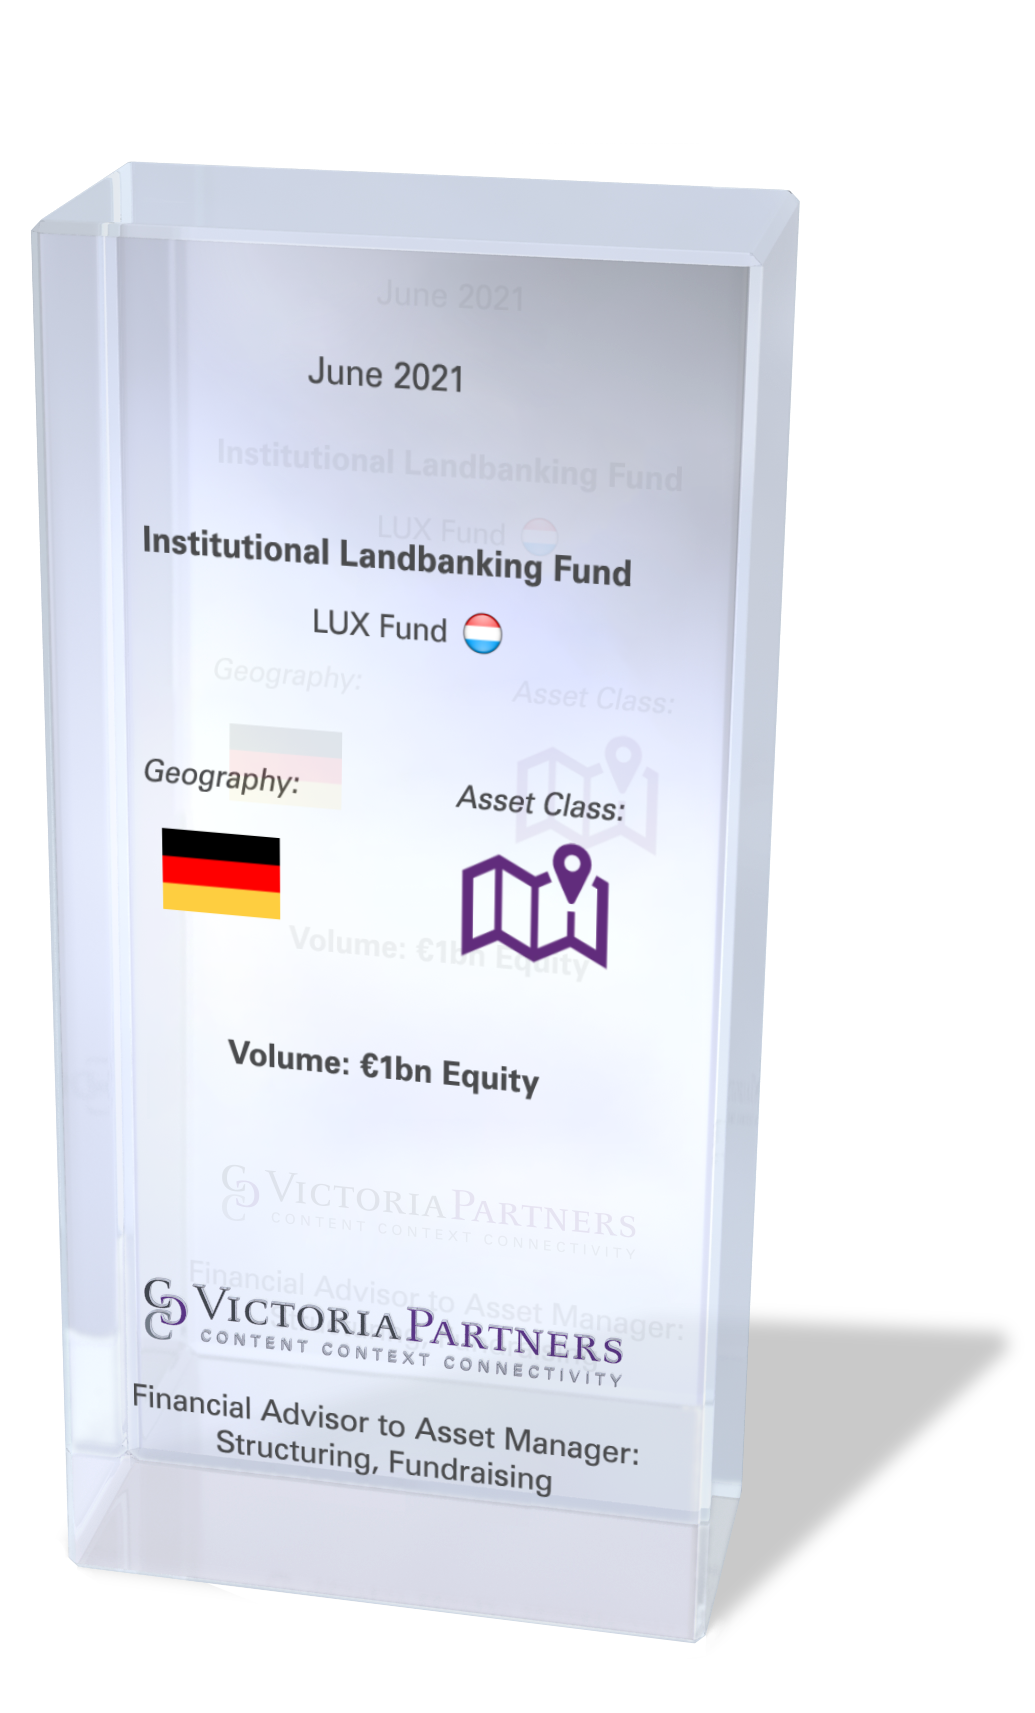 VICTORIAPARTNERS - Financial Advisor to Asset Manager: Structuring, Fundraising in Deutschland- June 2021